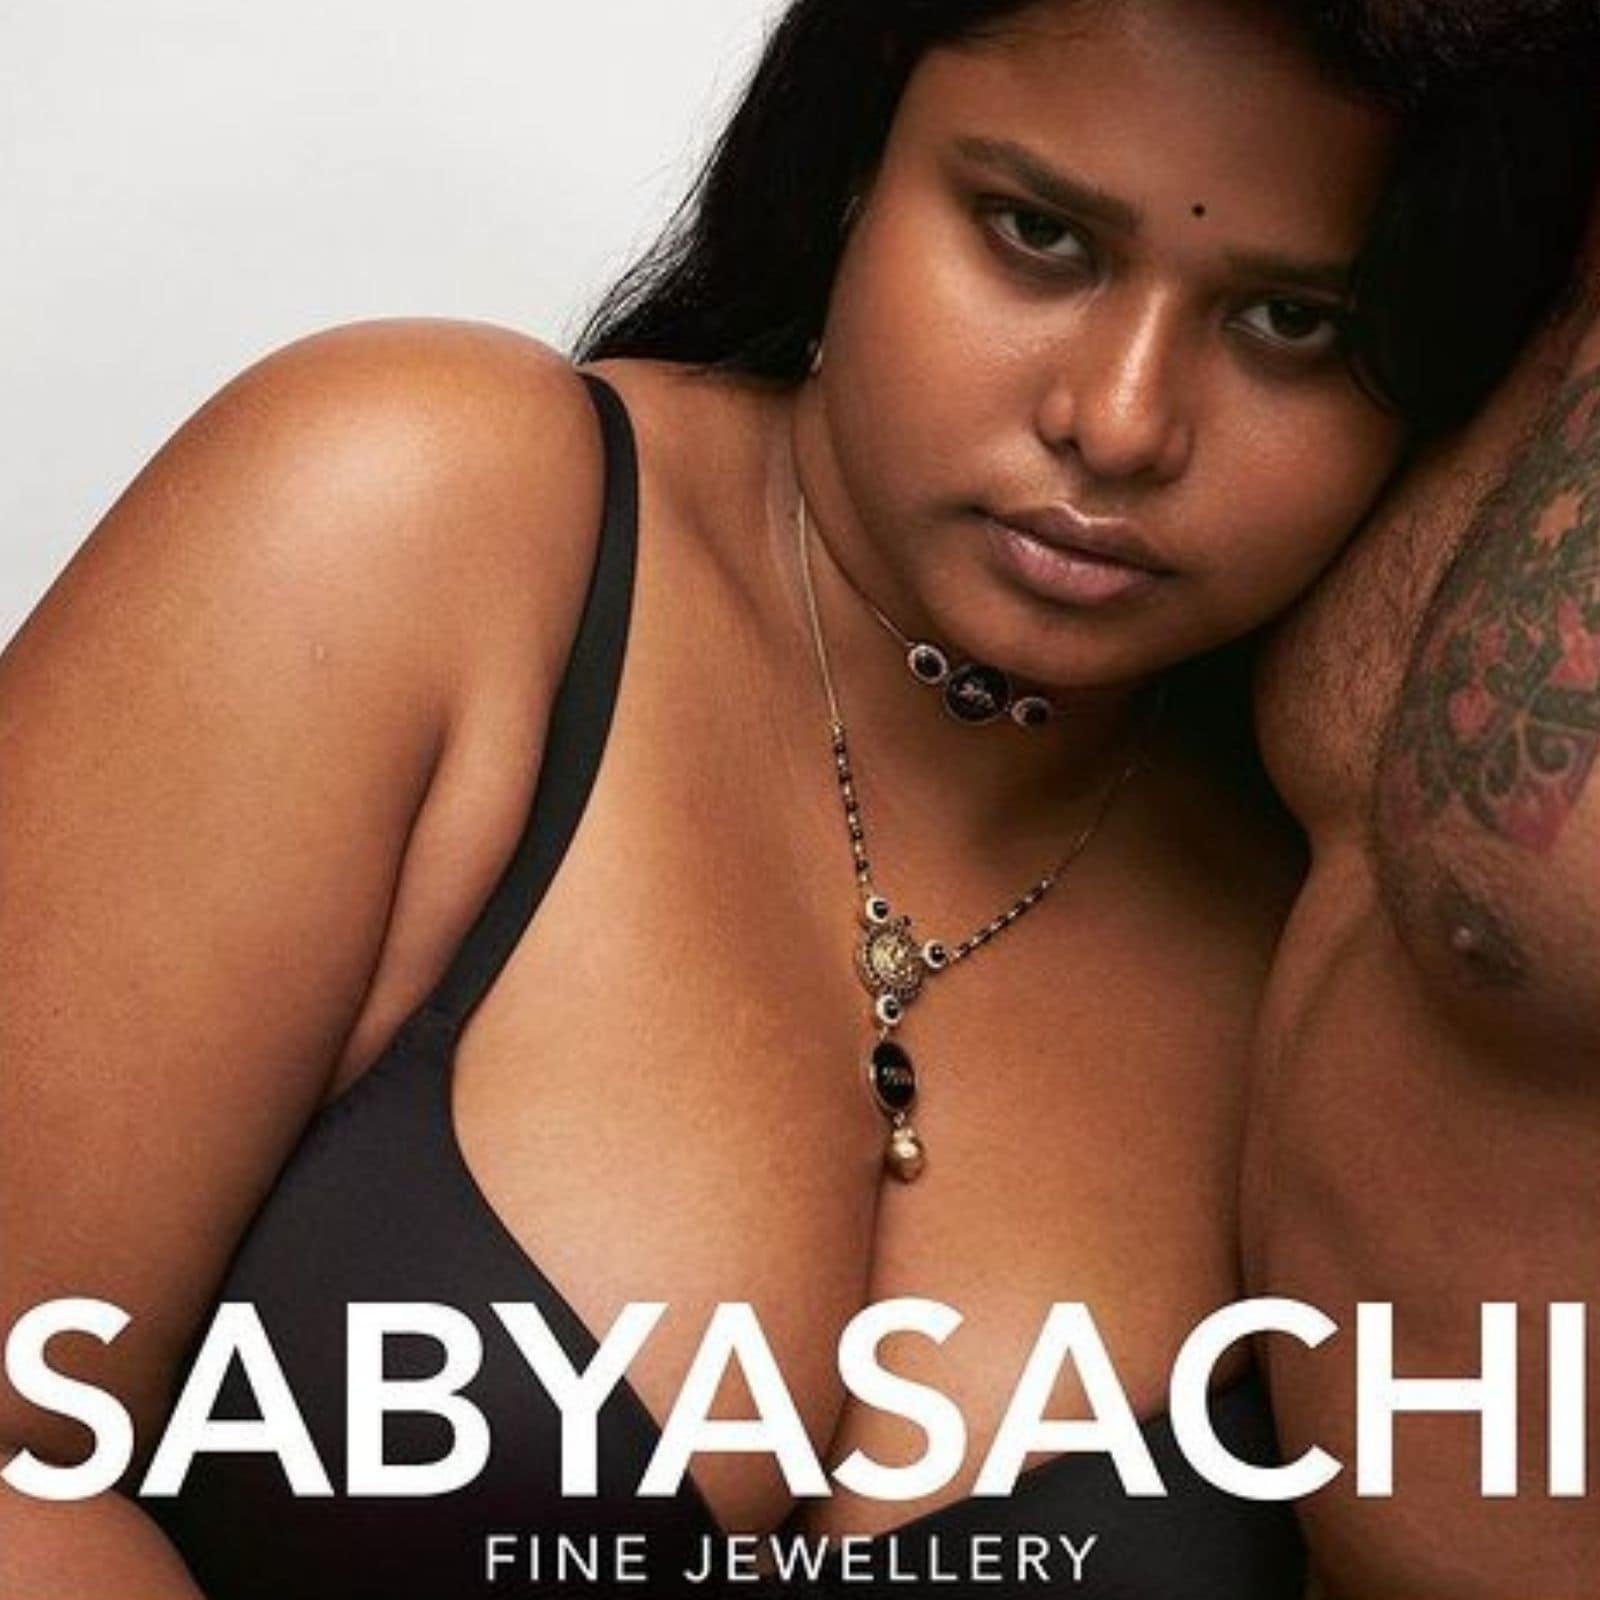 Sabyasachi's New Campaign Faces Flak For Featuring Mangalsutra as 'Fashion  Jewellery' - News18